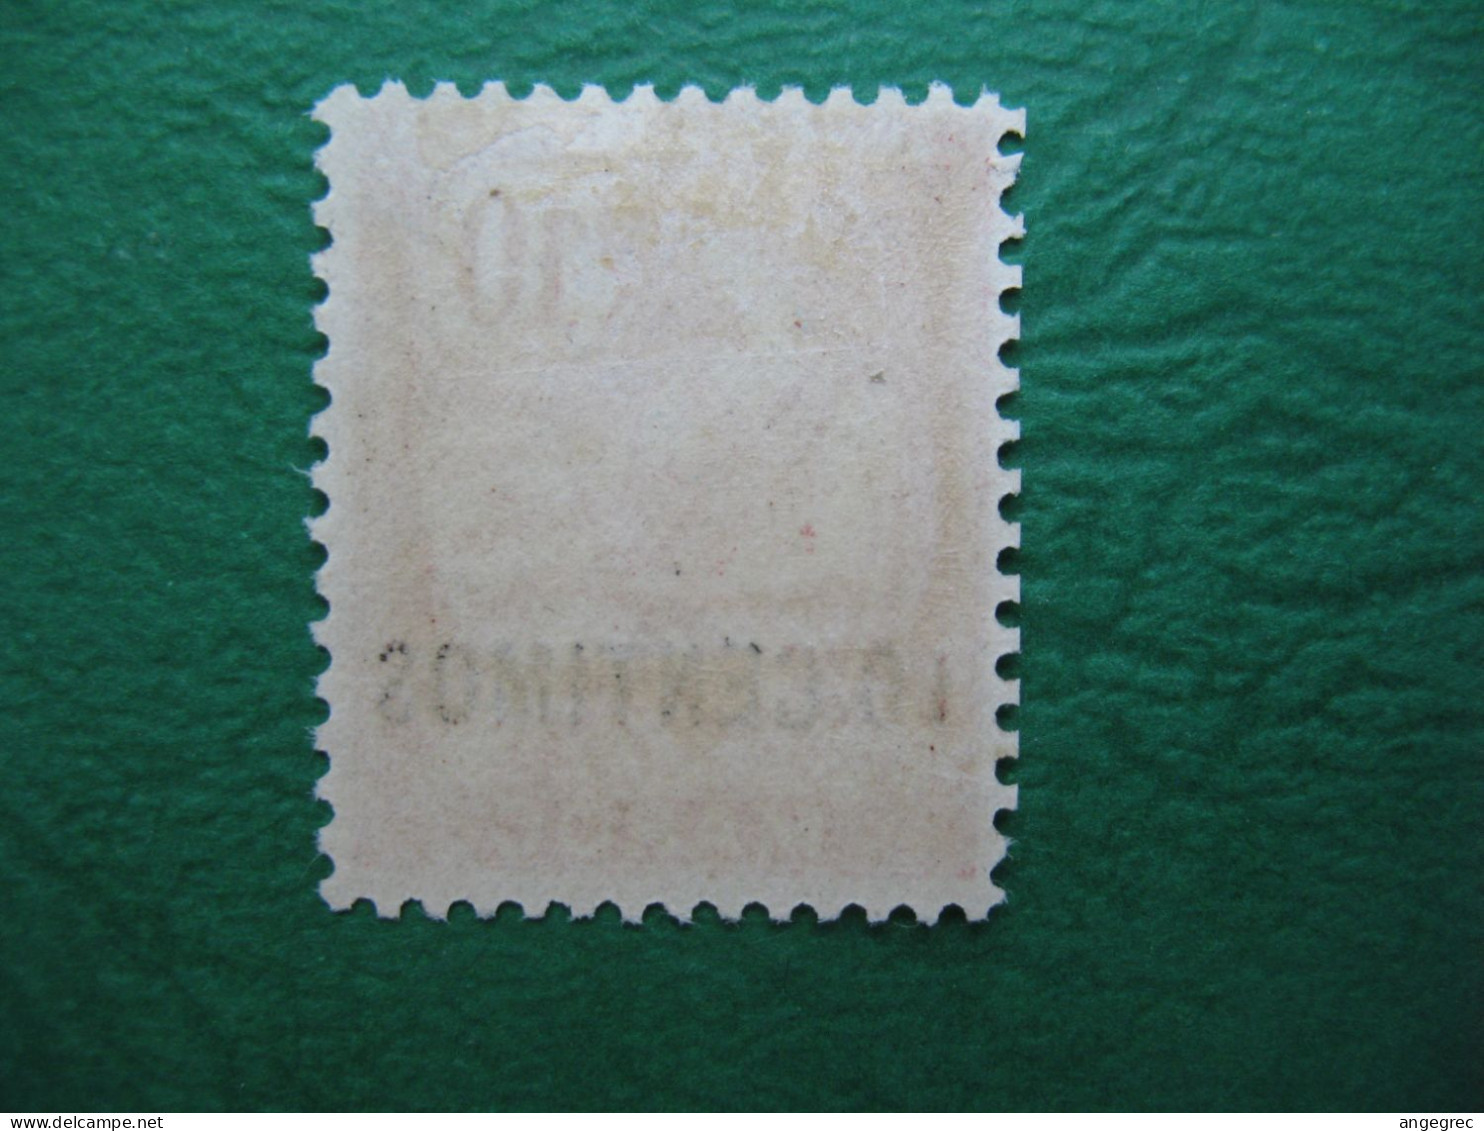 Maroc Stamps French Colonies 1902-1903   Type Mouchon   N° 12  Neuf *   à Voir - Timbres-taxe